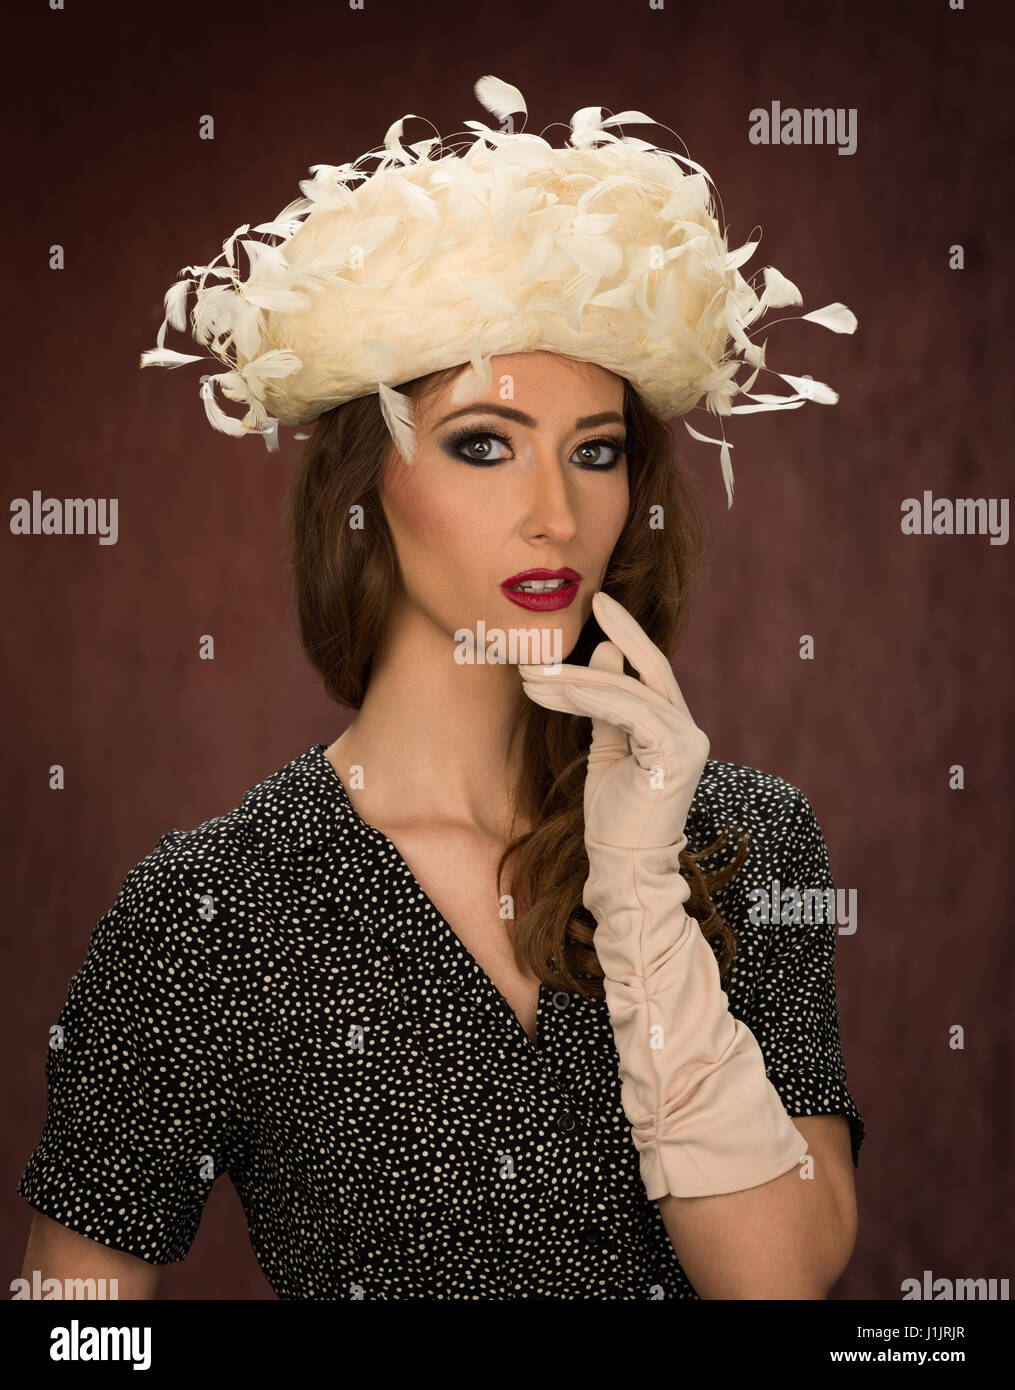 Young brunette model in a vintage white feathered hat Stock Photo